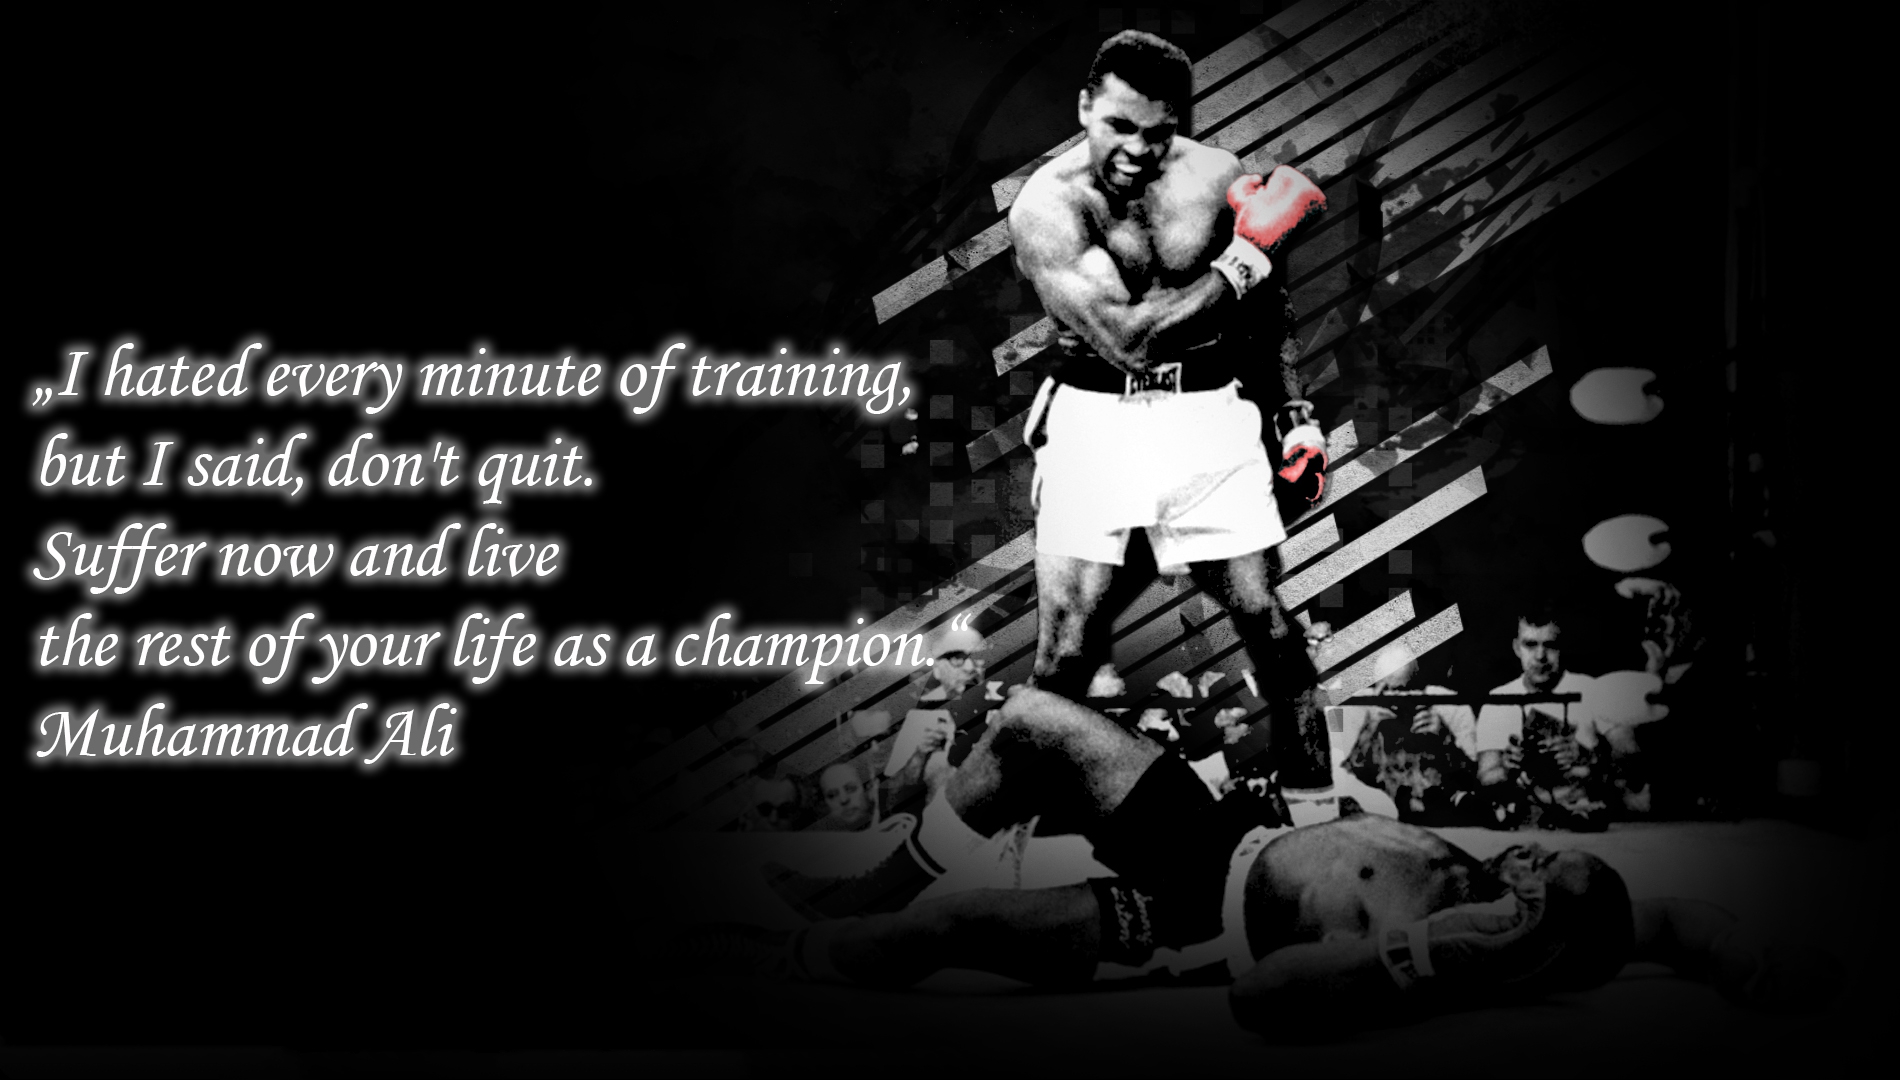 Muhammad Ali Quotes Wallpapers HD 